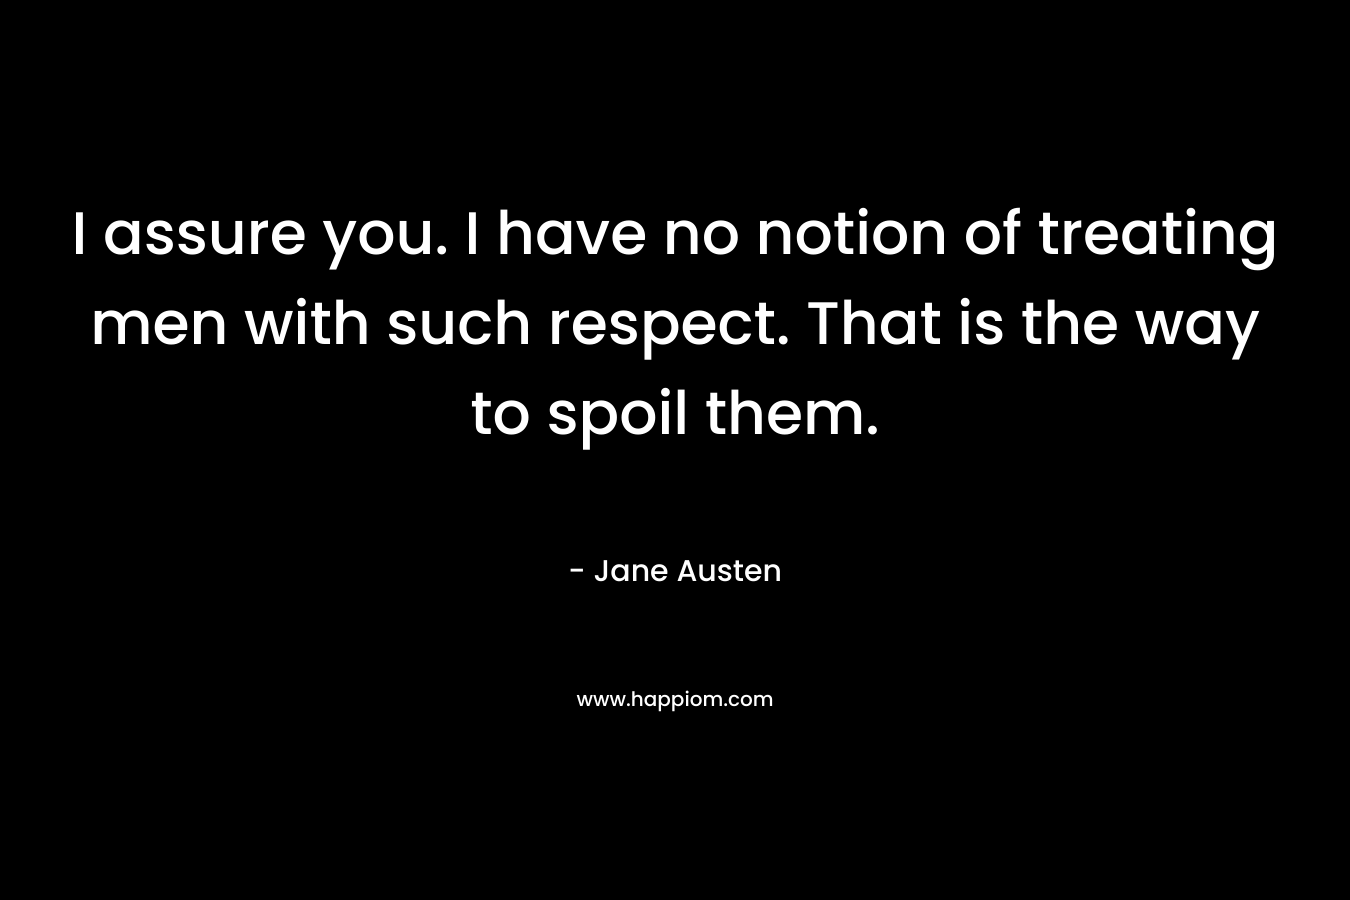 I assure you. I have no notion of treating men with such respect. That is the way to spoil them.